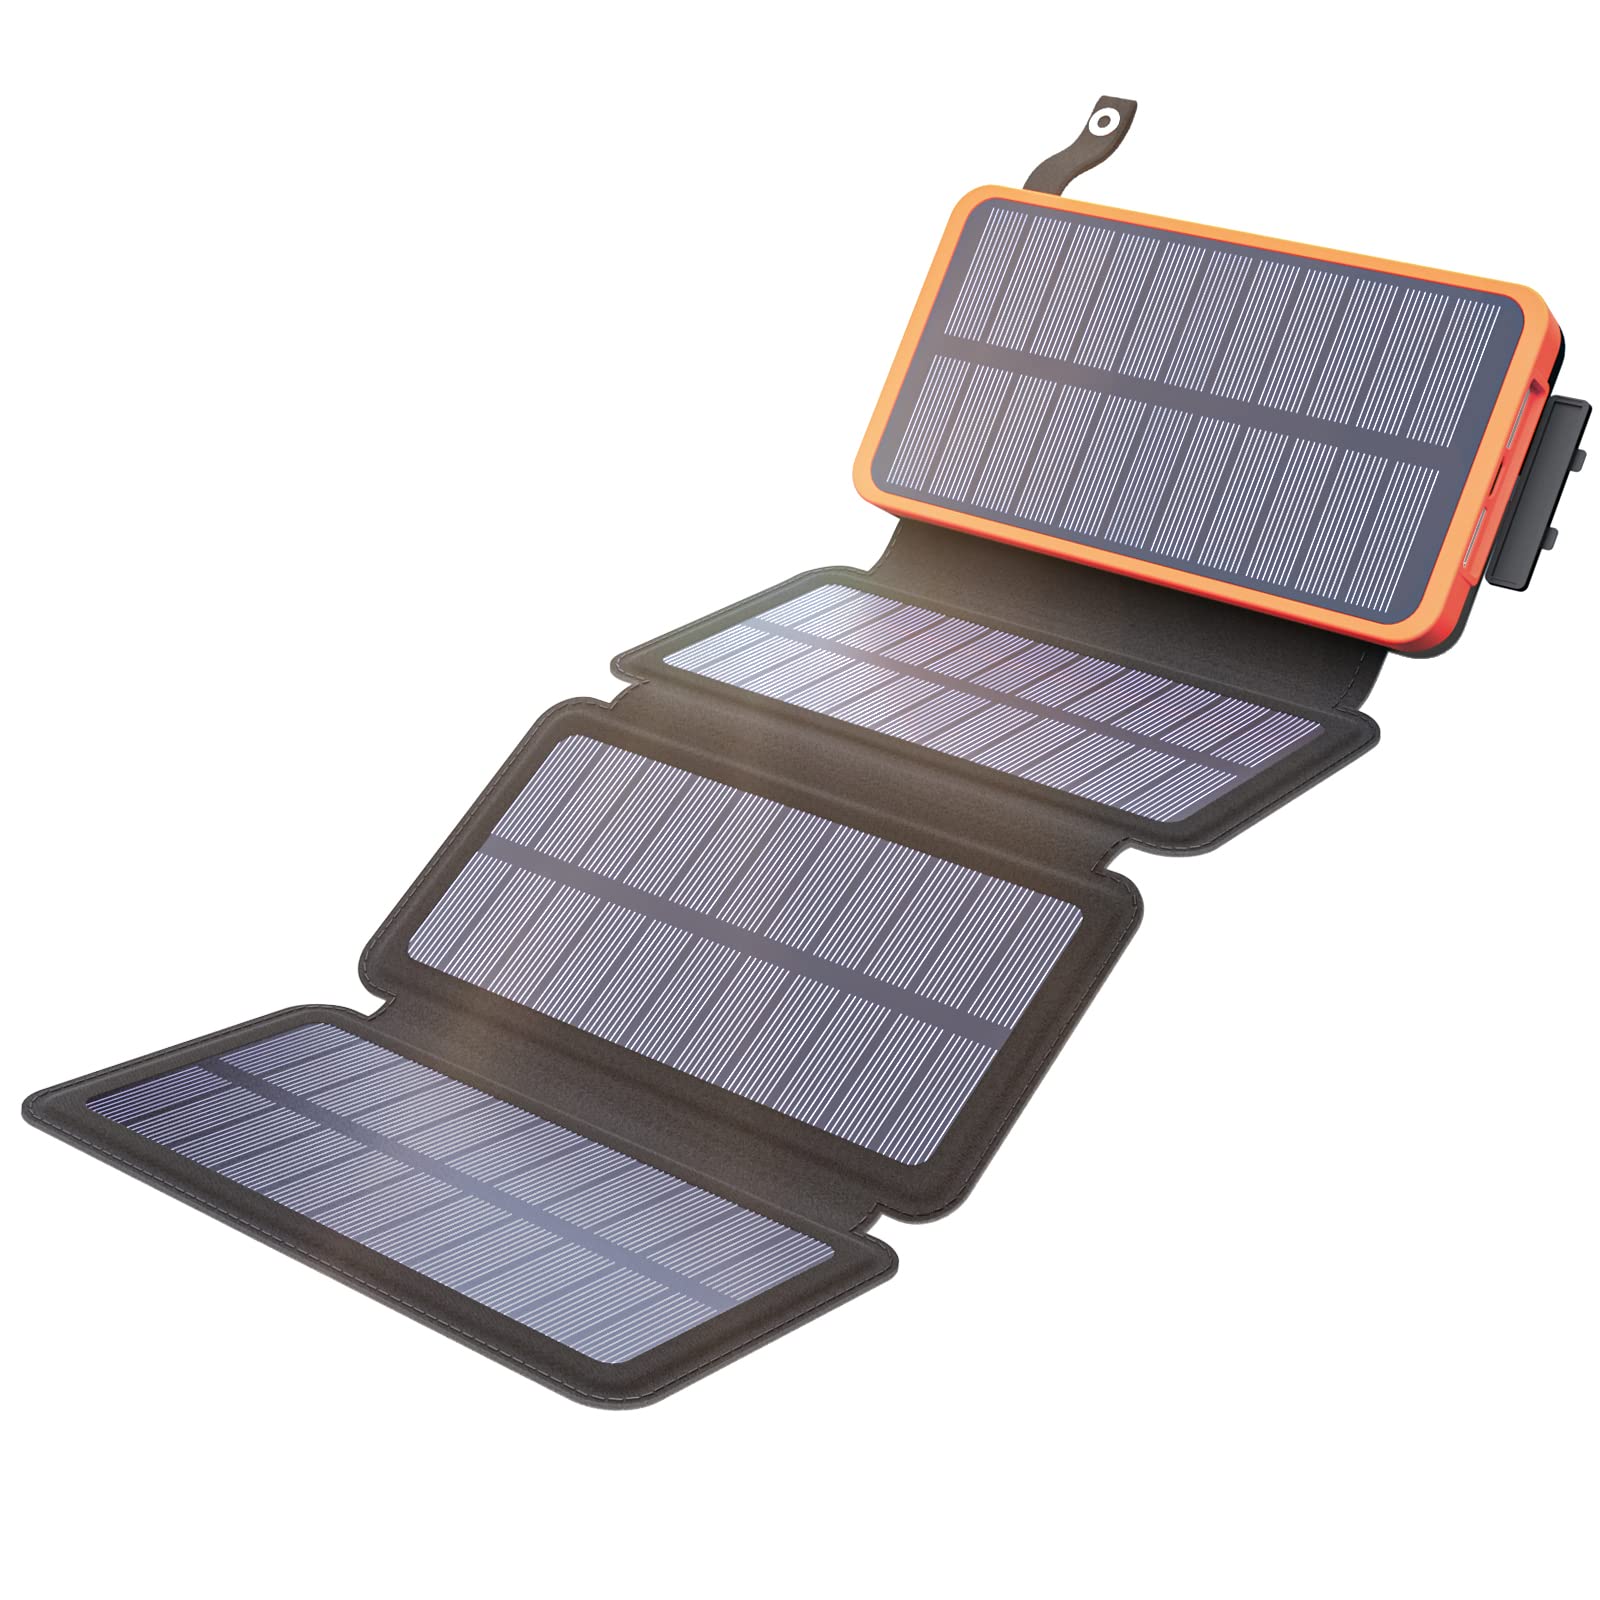 Solar Charging Guide: Maximizing The Benefits Of Your Solar Phone Charger